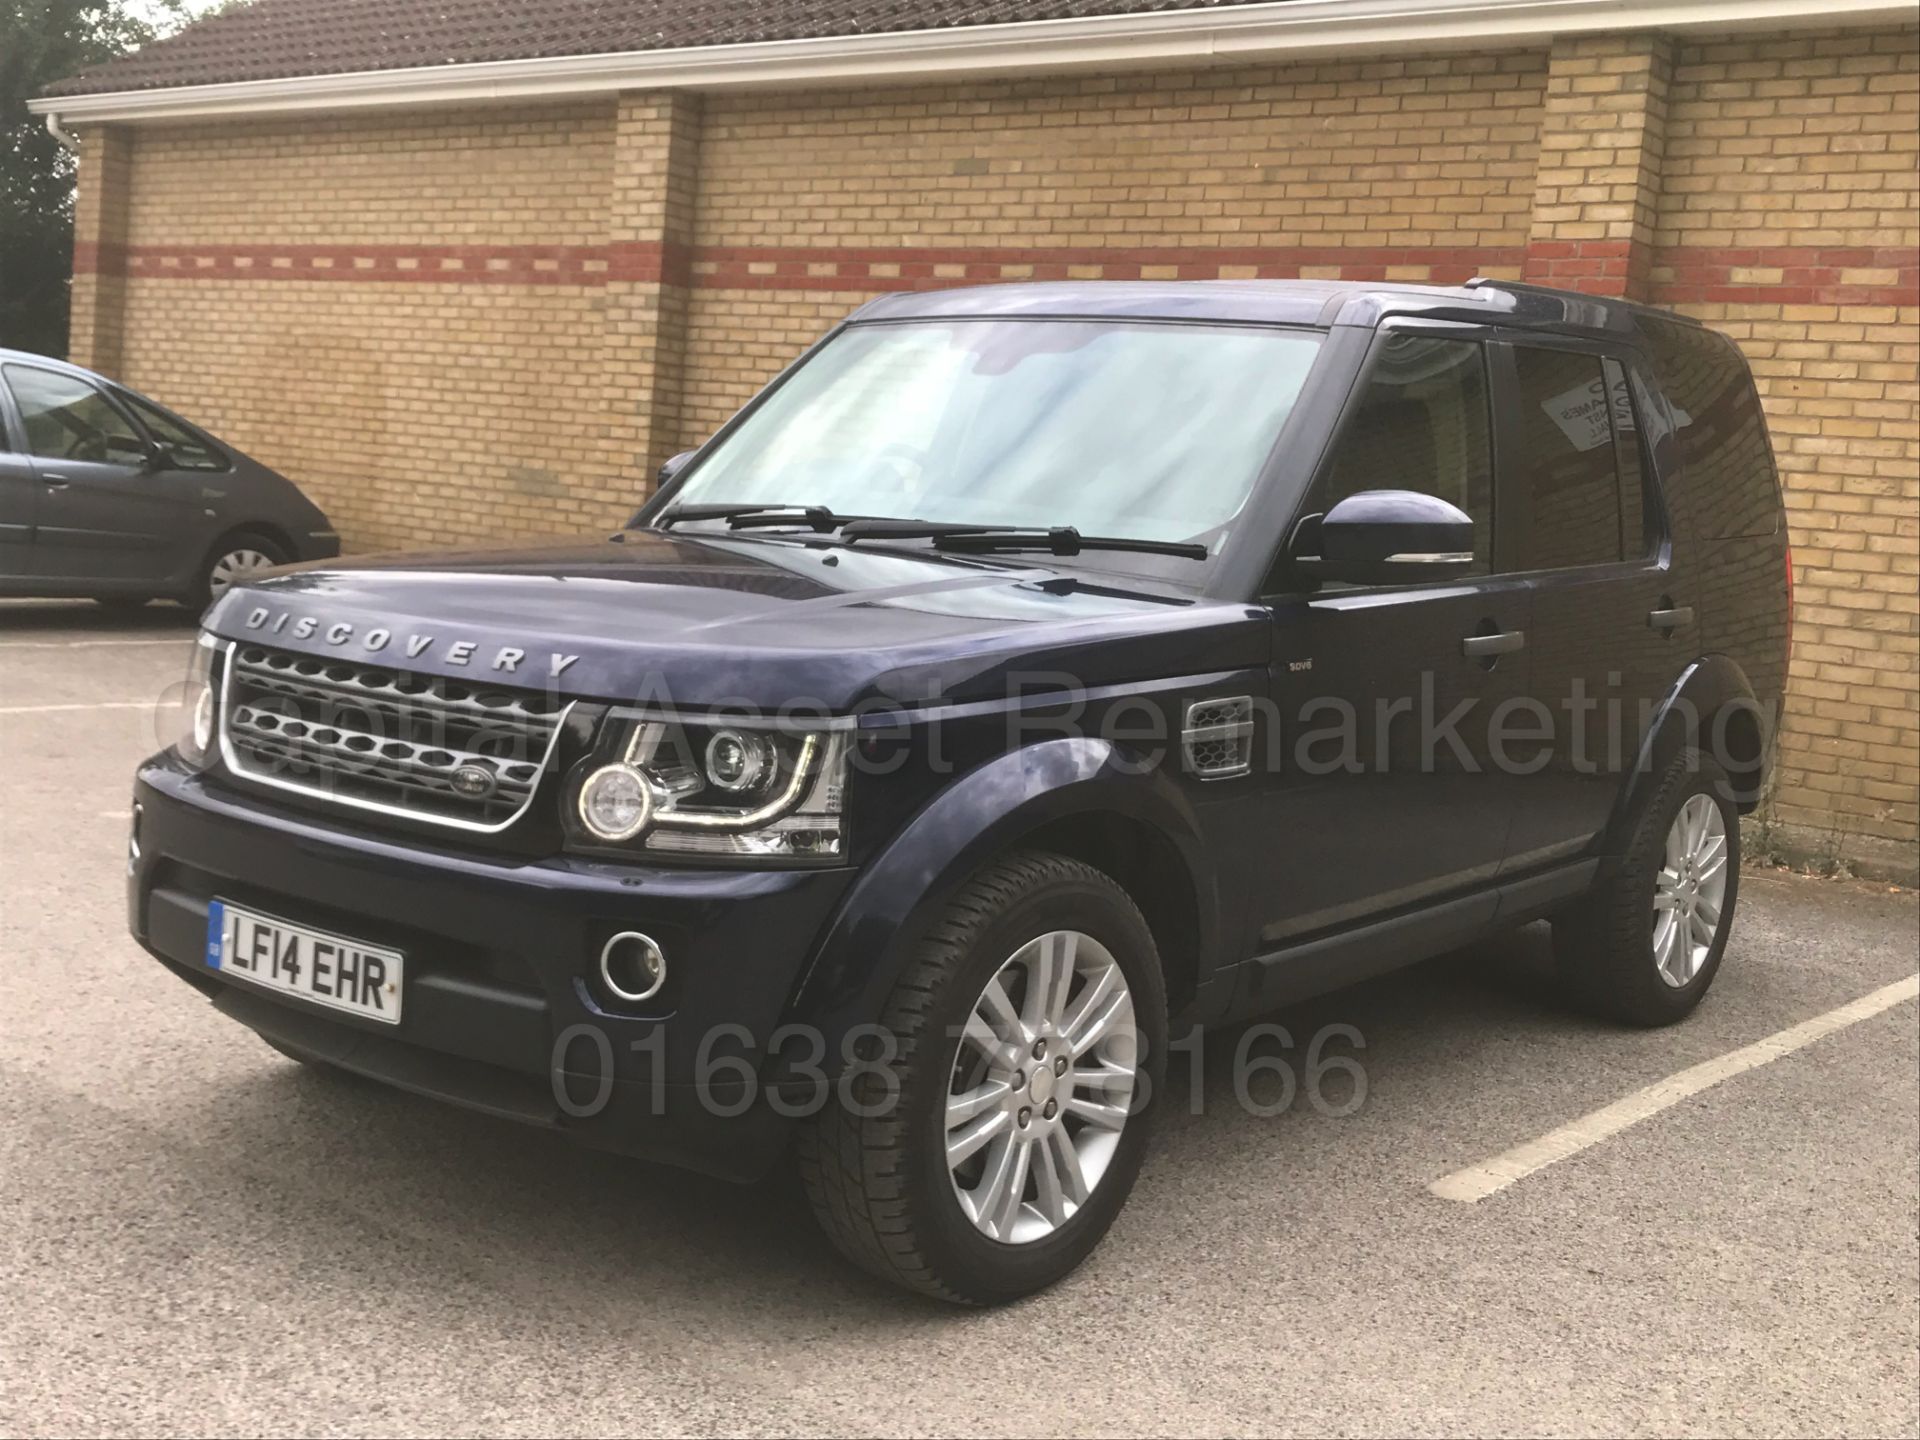 (On Sale) LAND ROVER DISCOVERY *XS EDITION* (2014) '3.0 SDV6 - 225 BHP- 8 SPEED AUTO' *MASSIVE SPEC* - Image 5 of 48